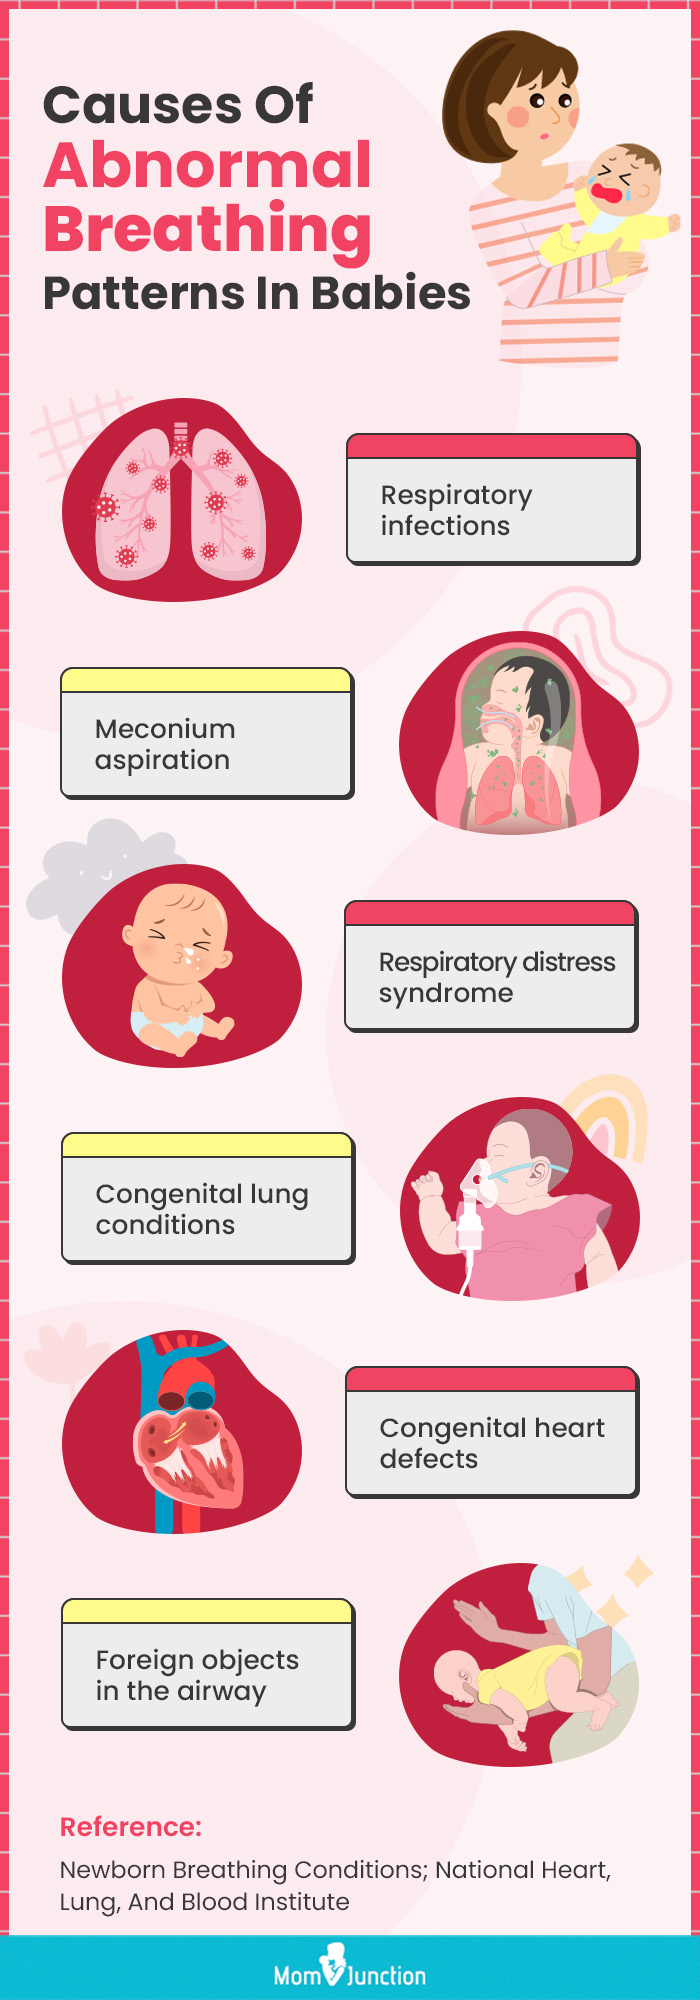 https://www.momjunction.com/wp-content/uploads/2016/05/Infographic-What-Causes-Abnormal-Breathing-Patterns-In-Babies.jpg